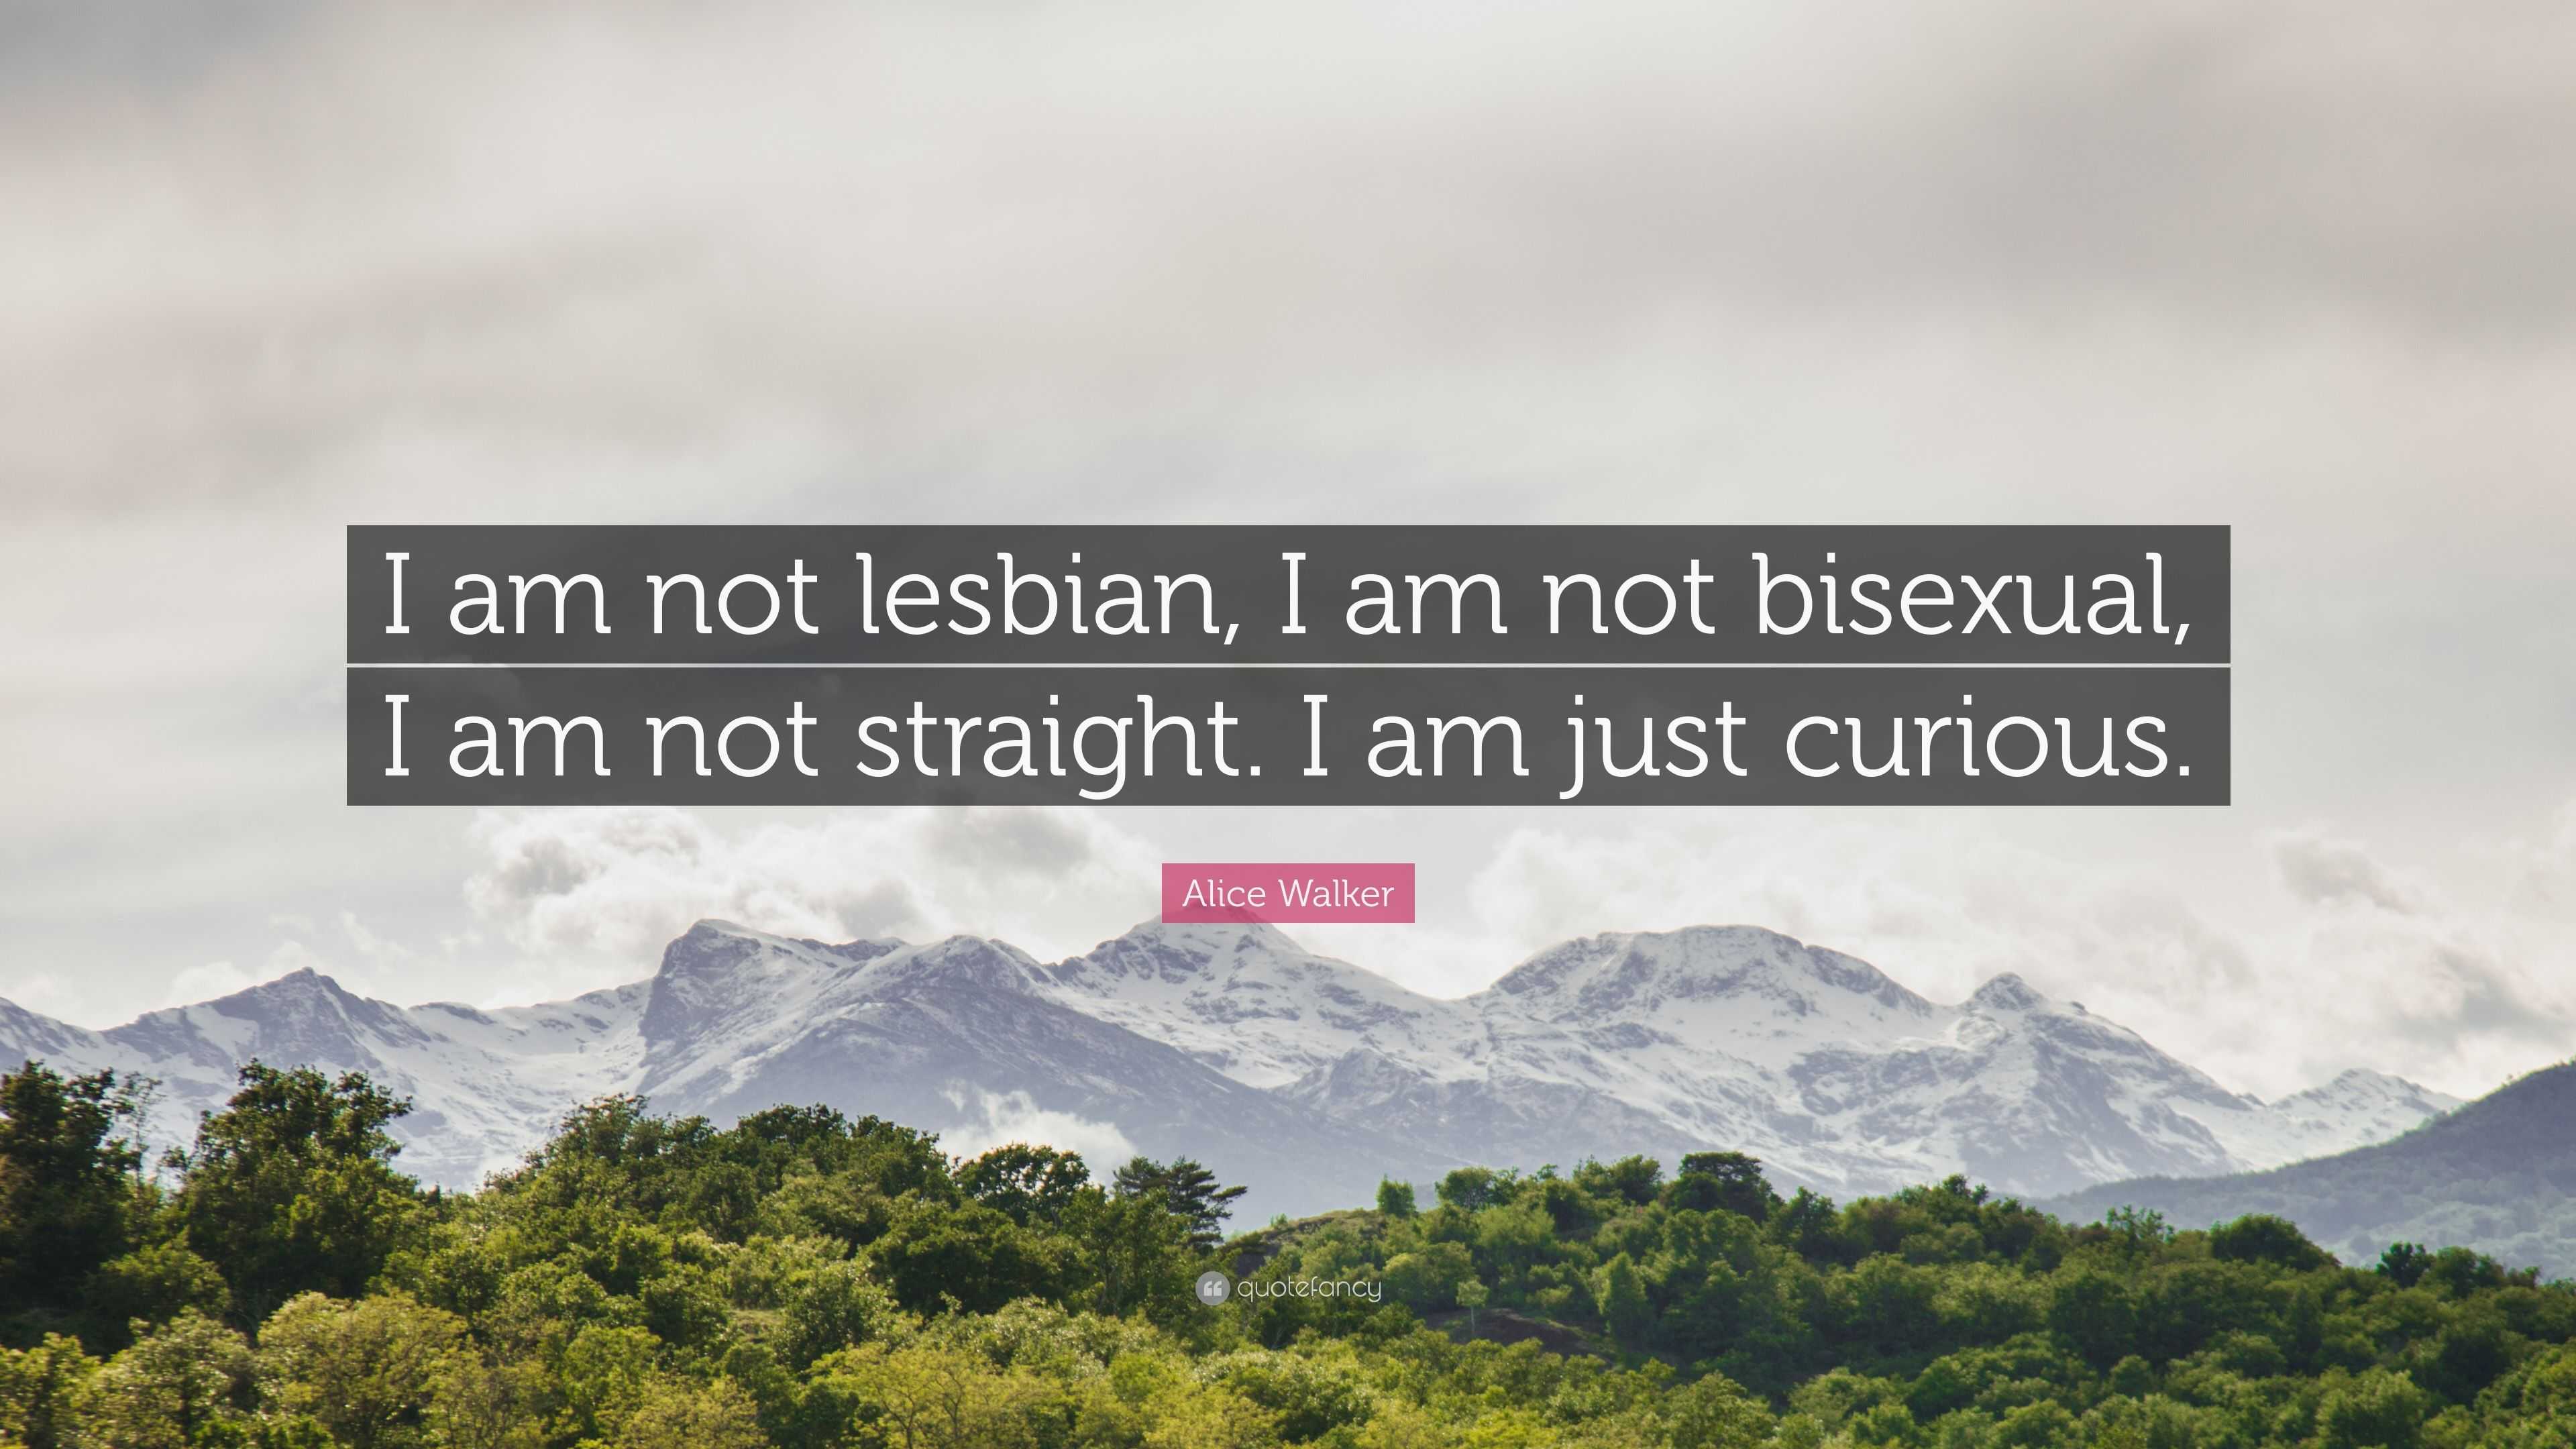 Alice Walker Quote “i Am Not Lesbian I Am Not Bisexual I Am Not Straight I Am Just Curious ”